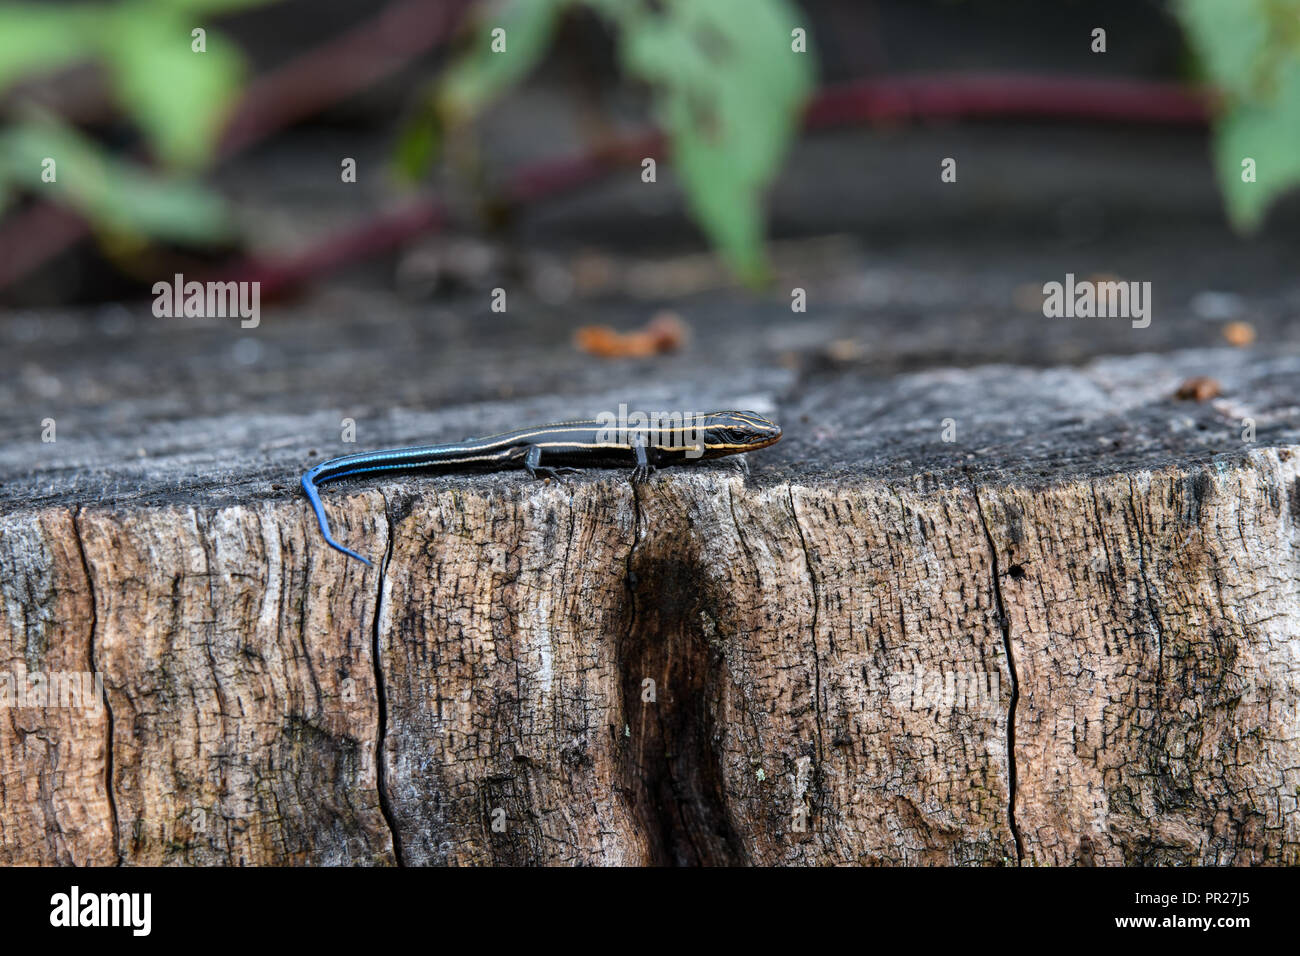 Juvenile five-lined skink on tree stump. It is a species of lizard endemic to North America and one of the most common lizards in the eastern U.S. Stock Photo